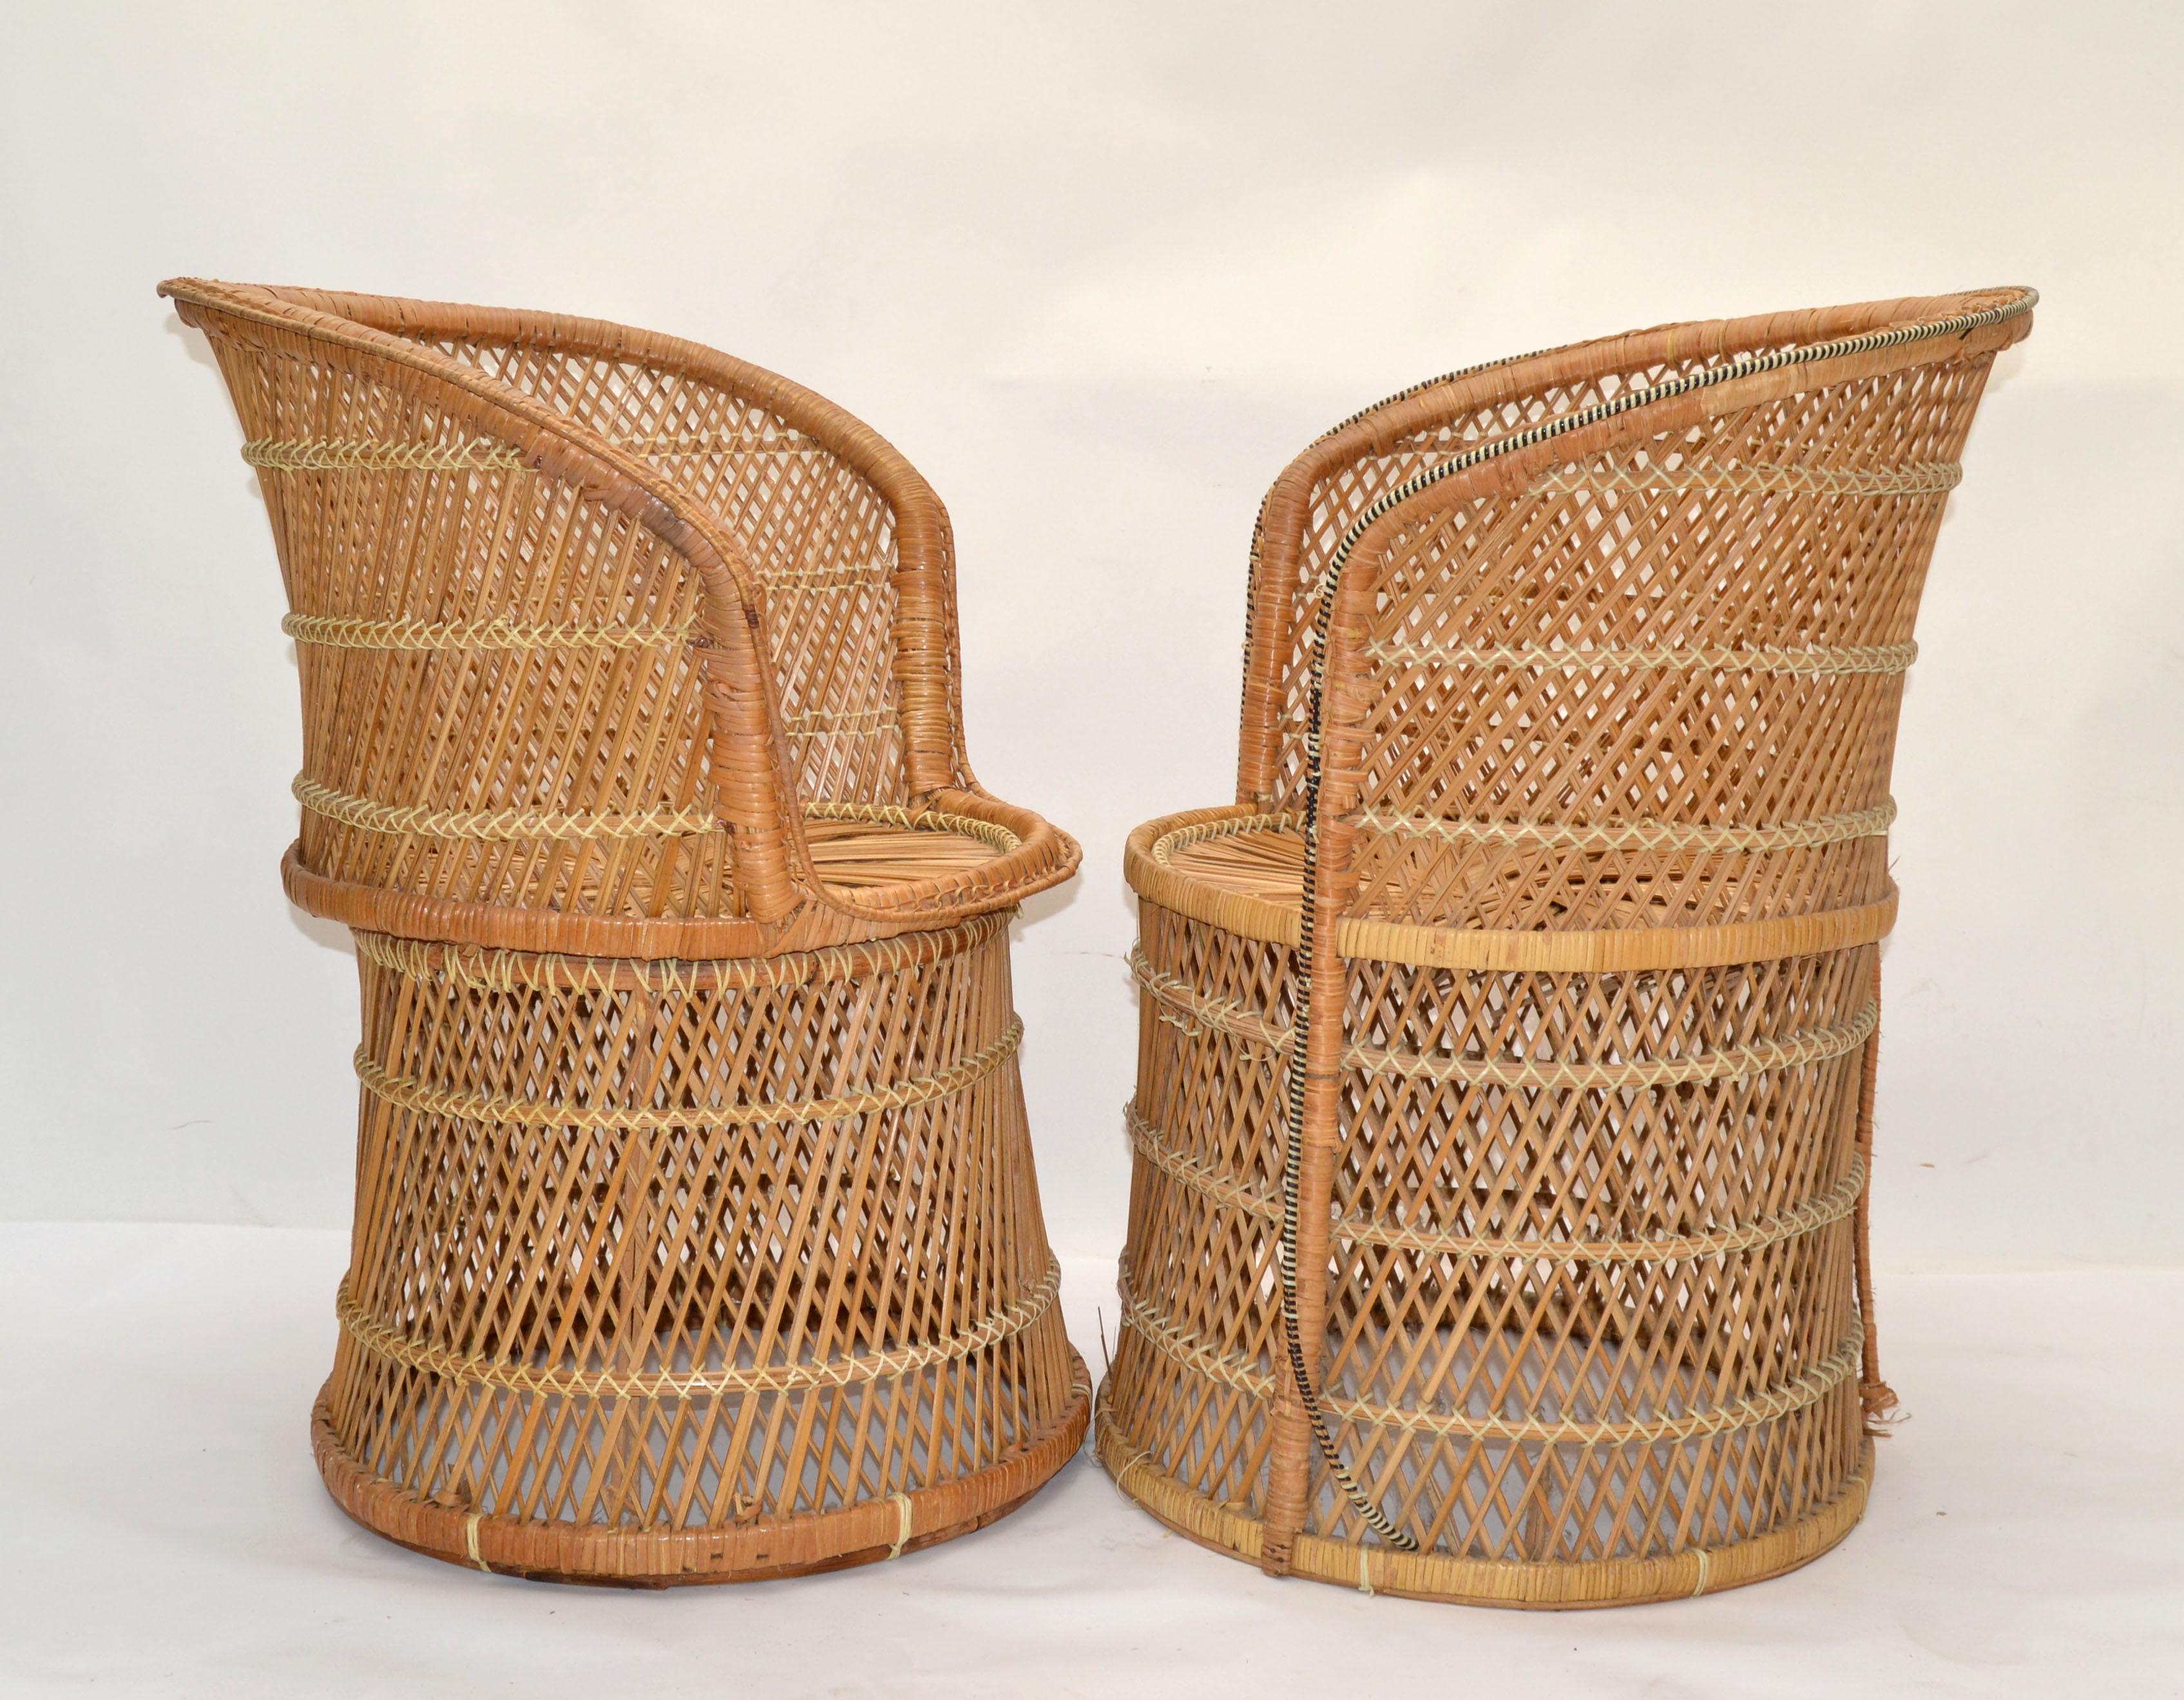 Vintage Set of Him & Her Cane, Bamboo and Wicker armchairs. These are handcrafted chairs with cane seats feature bamboo frames and Chinese inspired bamboo patterns. The backrests are designed with an extraordinary pattern as shown in the pictures.